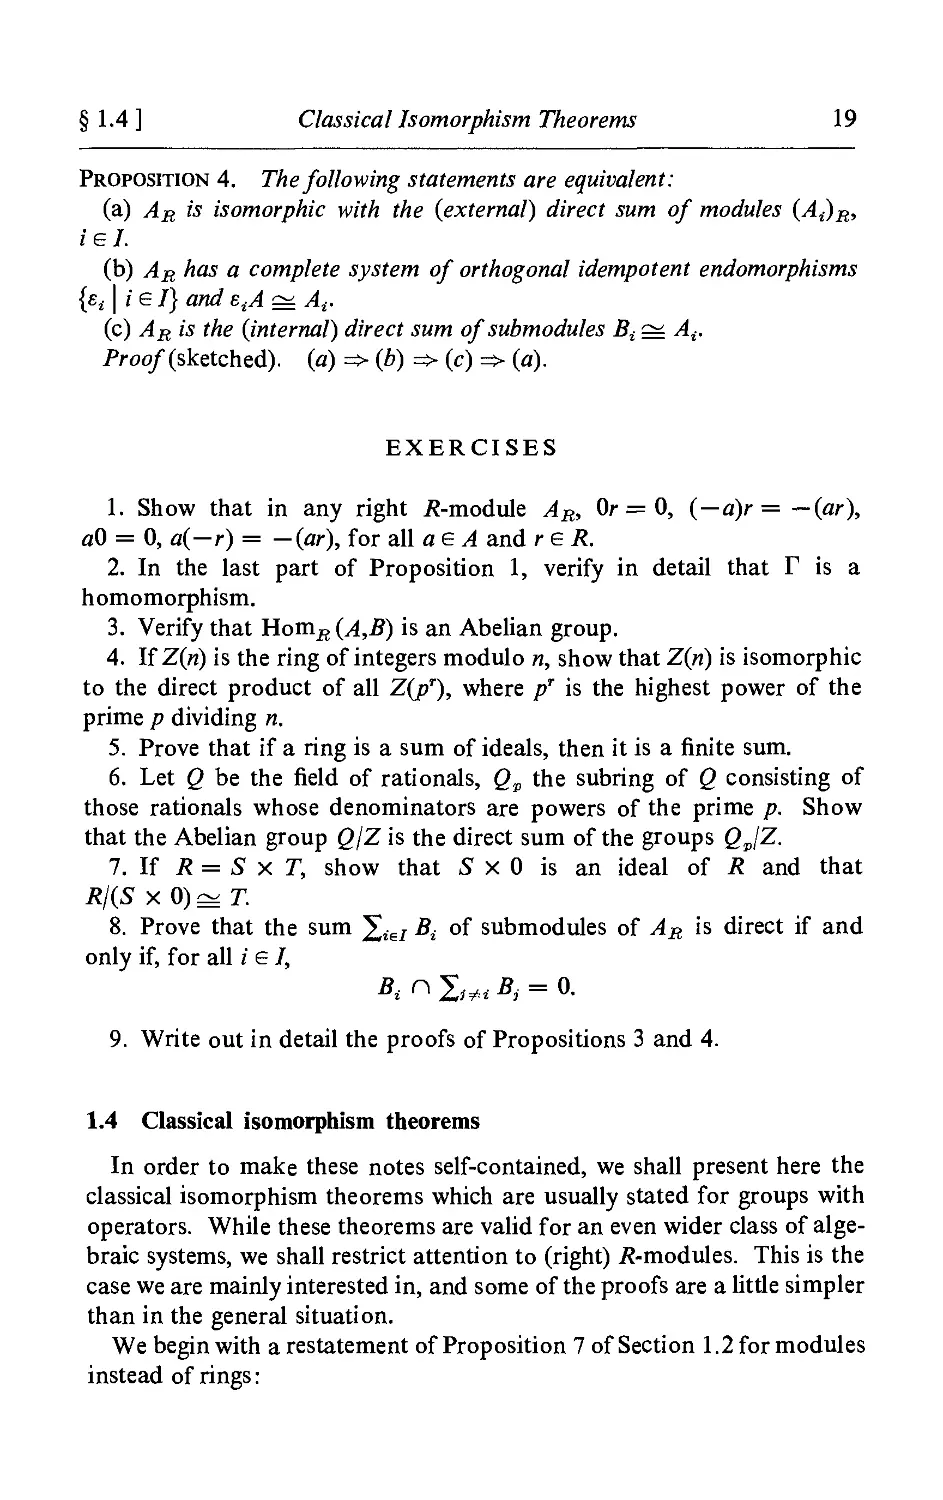 1.4 Classical isomorphism theorems